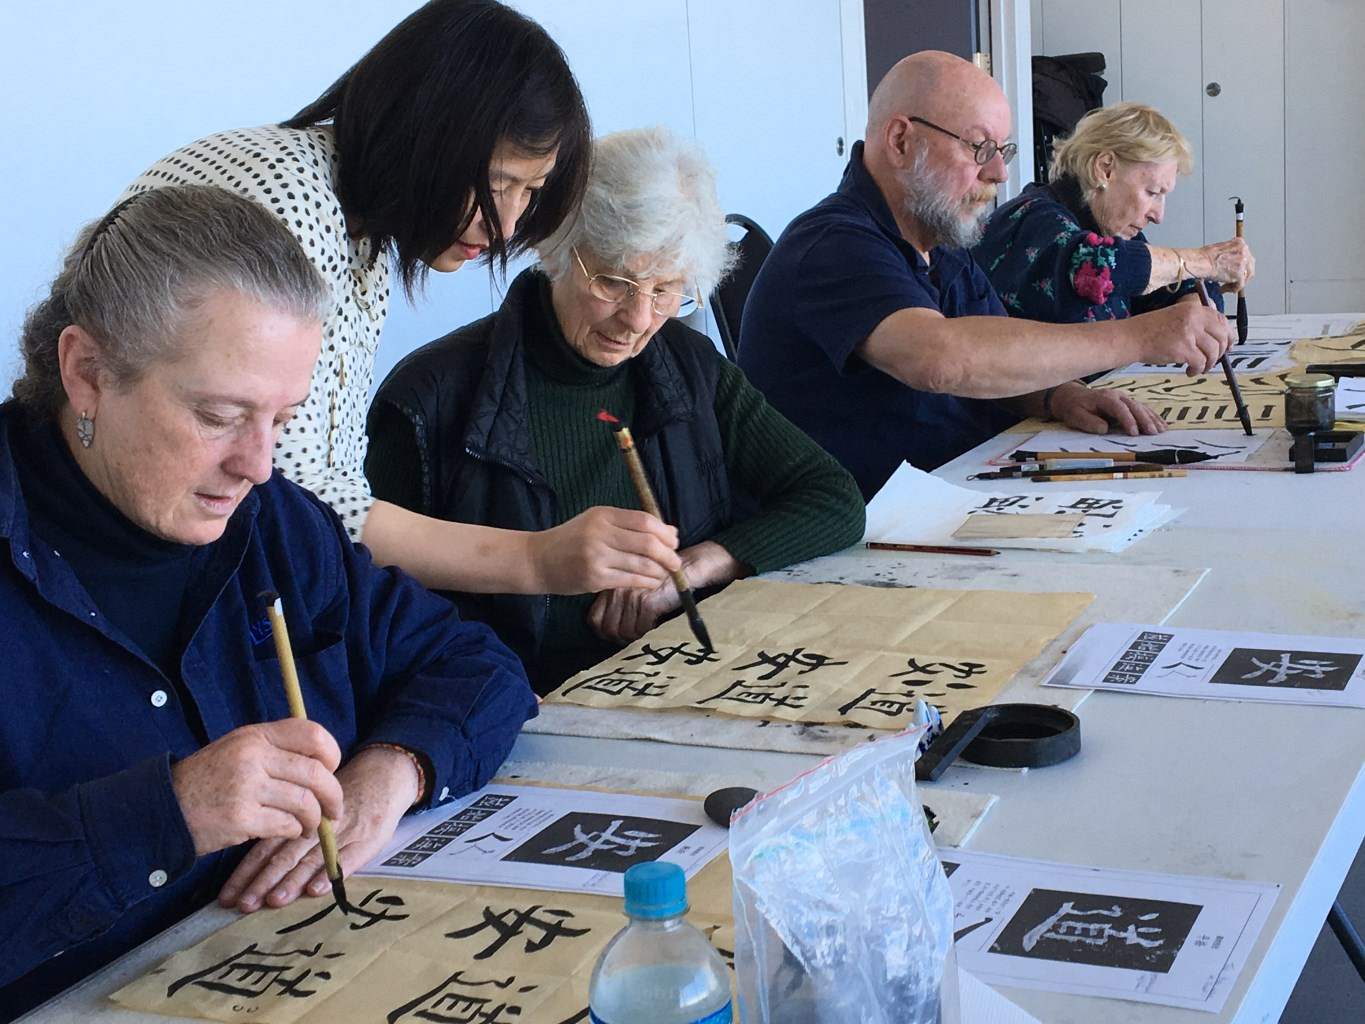 Chinese Calligraphy workshop